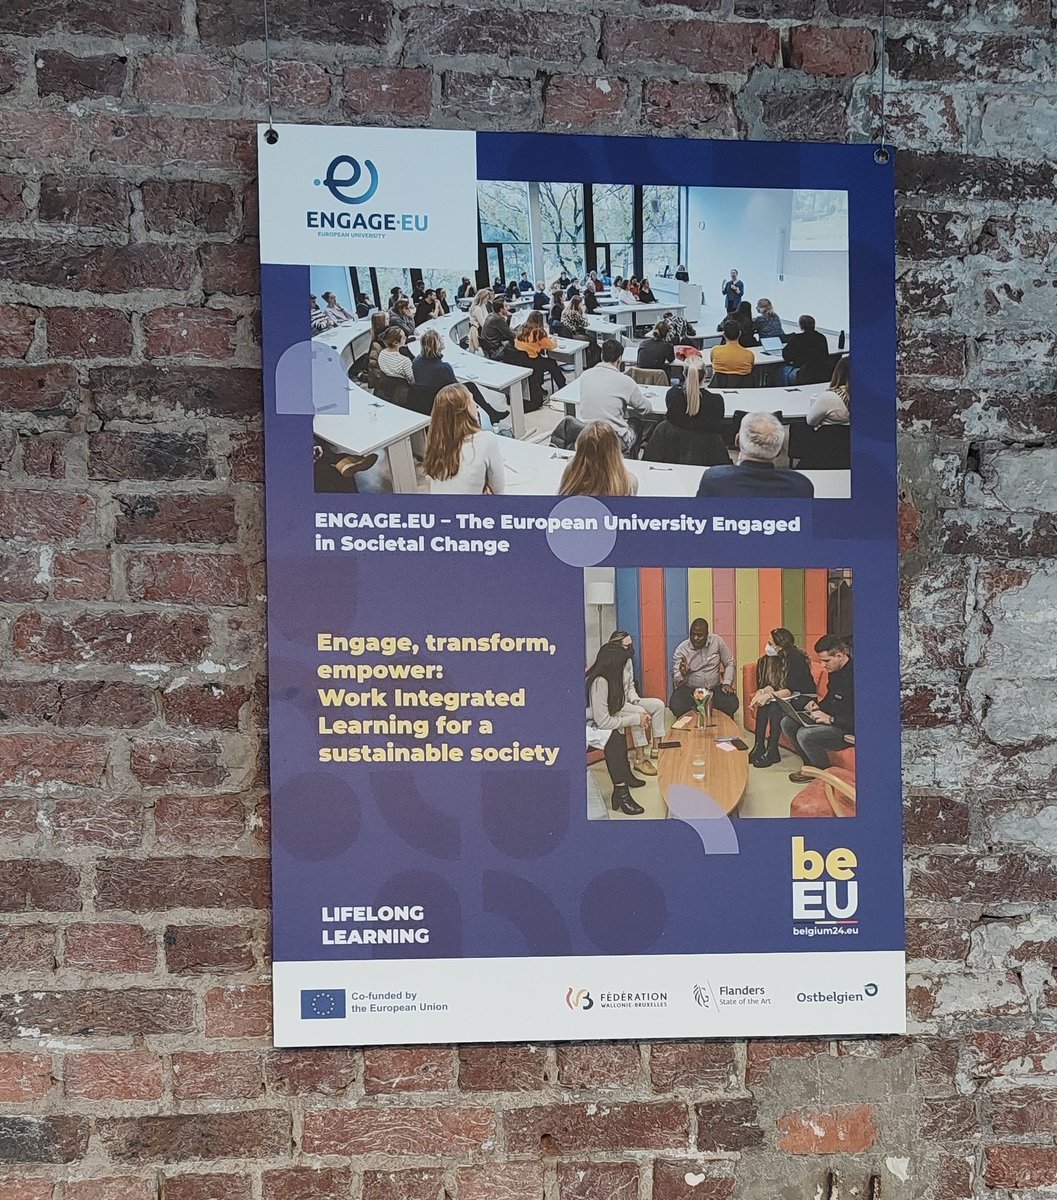 ENGAGE.EU at the Lifelong Learning Conference in Brussels on the topic “Fostering a learning culture”. Mira Gorris from Tilburg University and Ursula Schlichter from University of Mannheim are proudly representing our European University alliance.